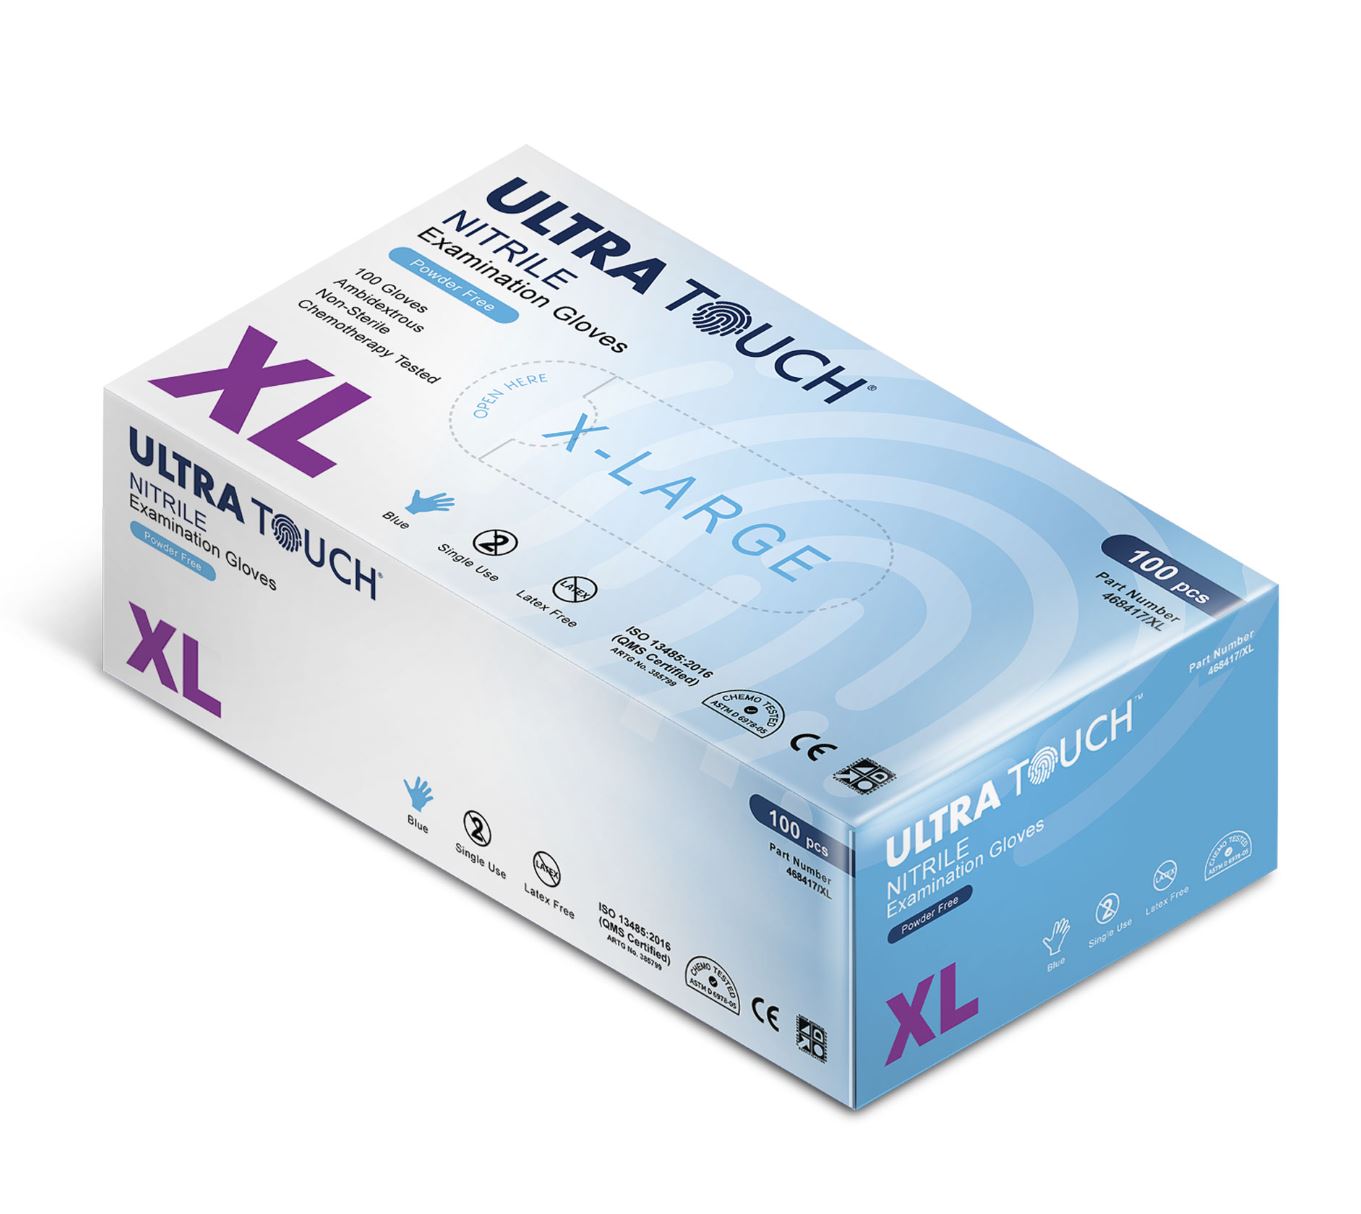 Ultra Touch Examination Nitrile Blue Powder Free Gloves (Multiple Sizes Available)